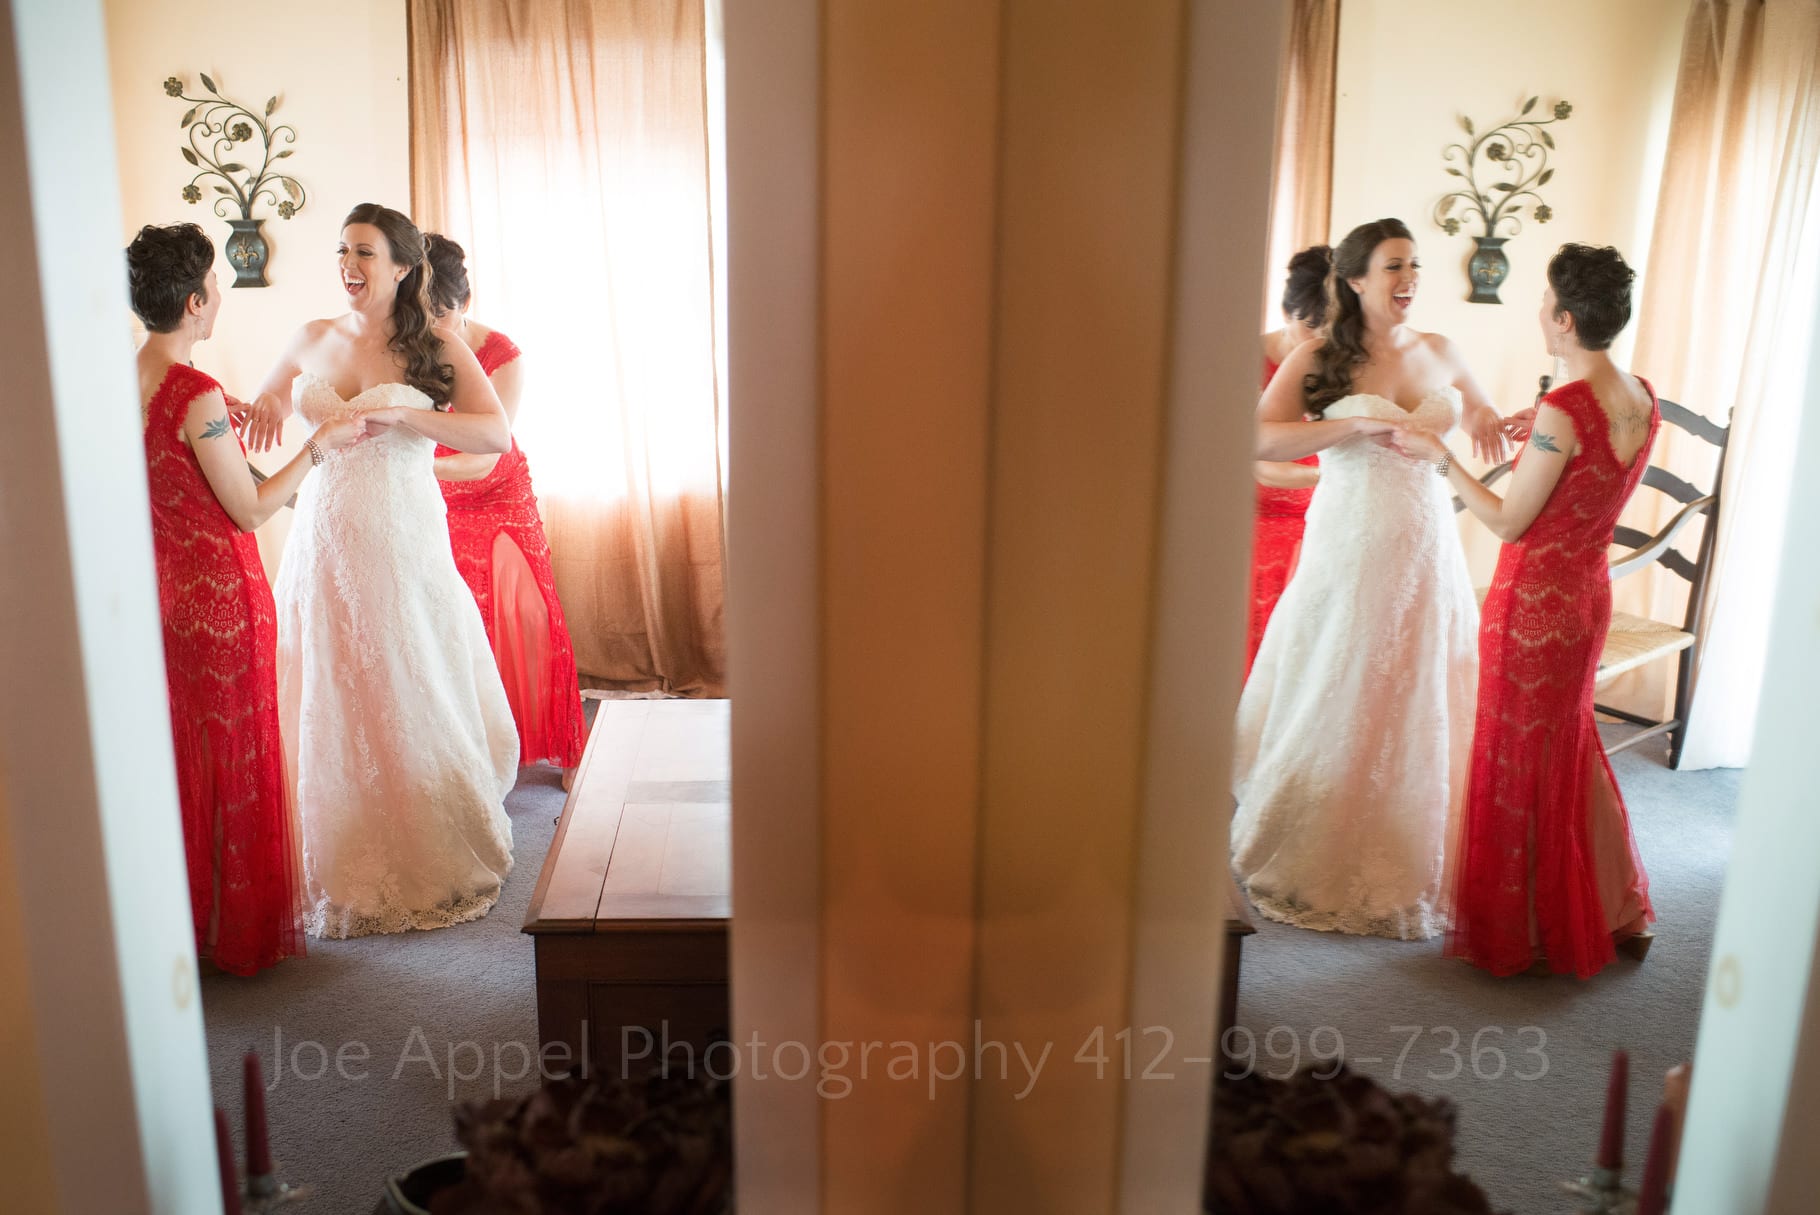 A double view of a bride being helped into her wedding dress caused by a reflection in a bathroom mirror